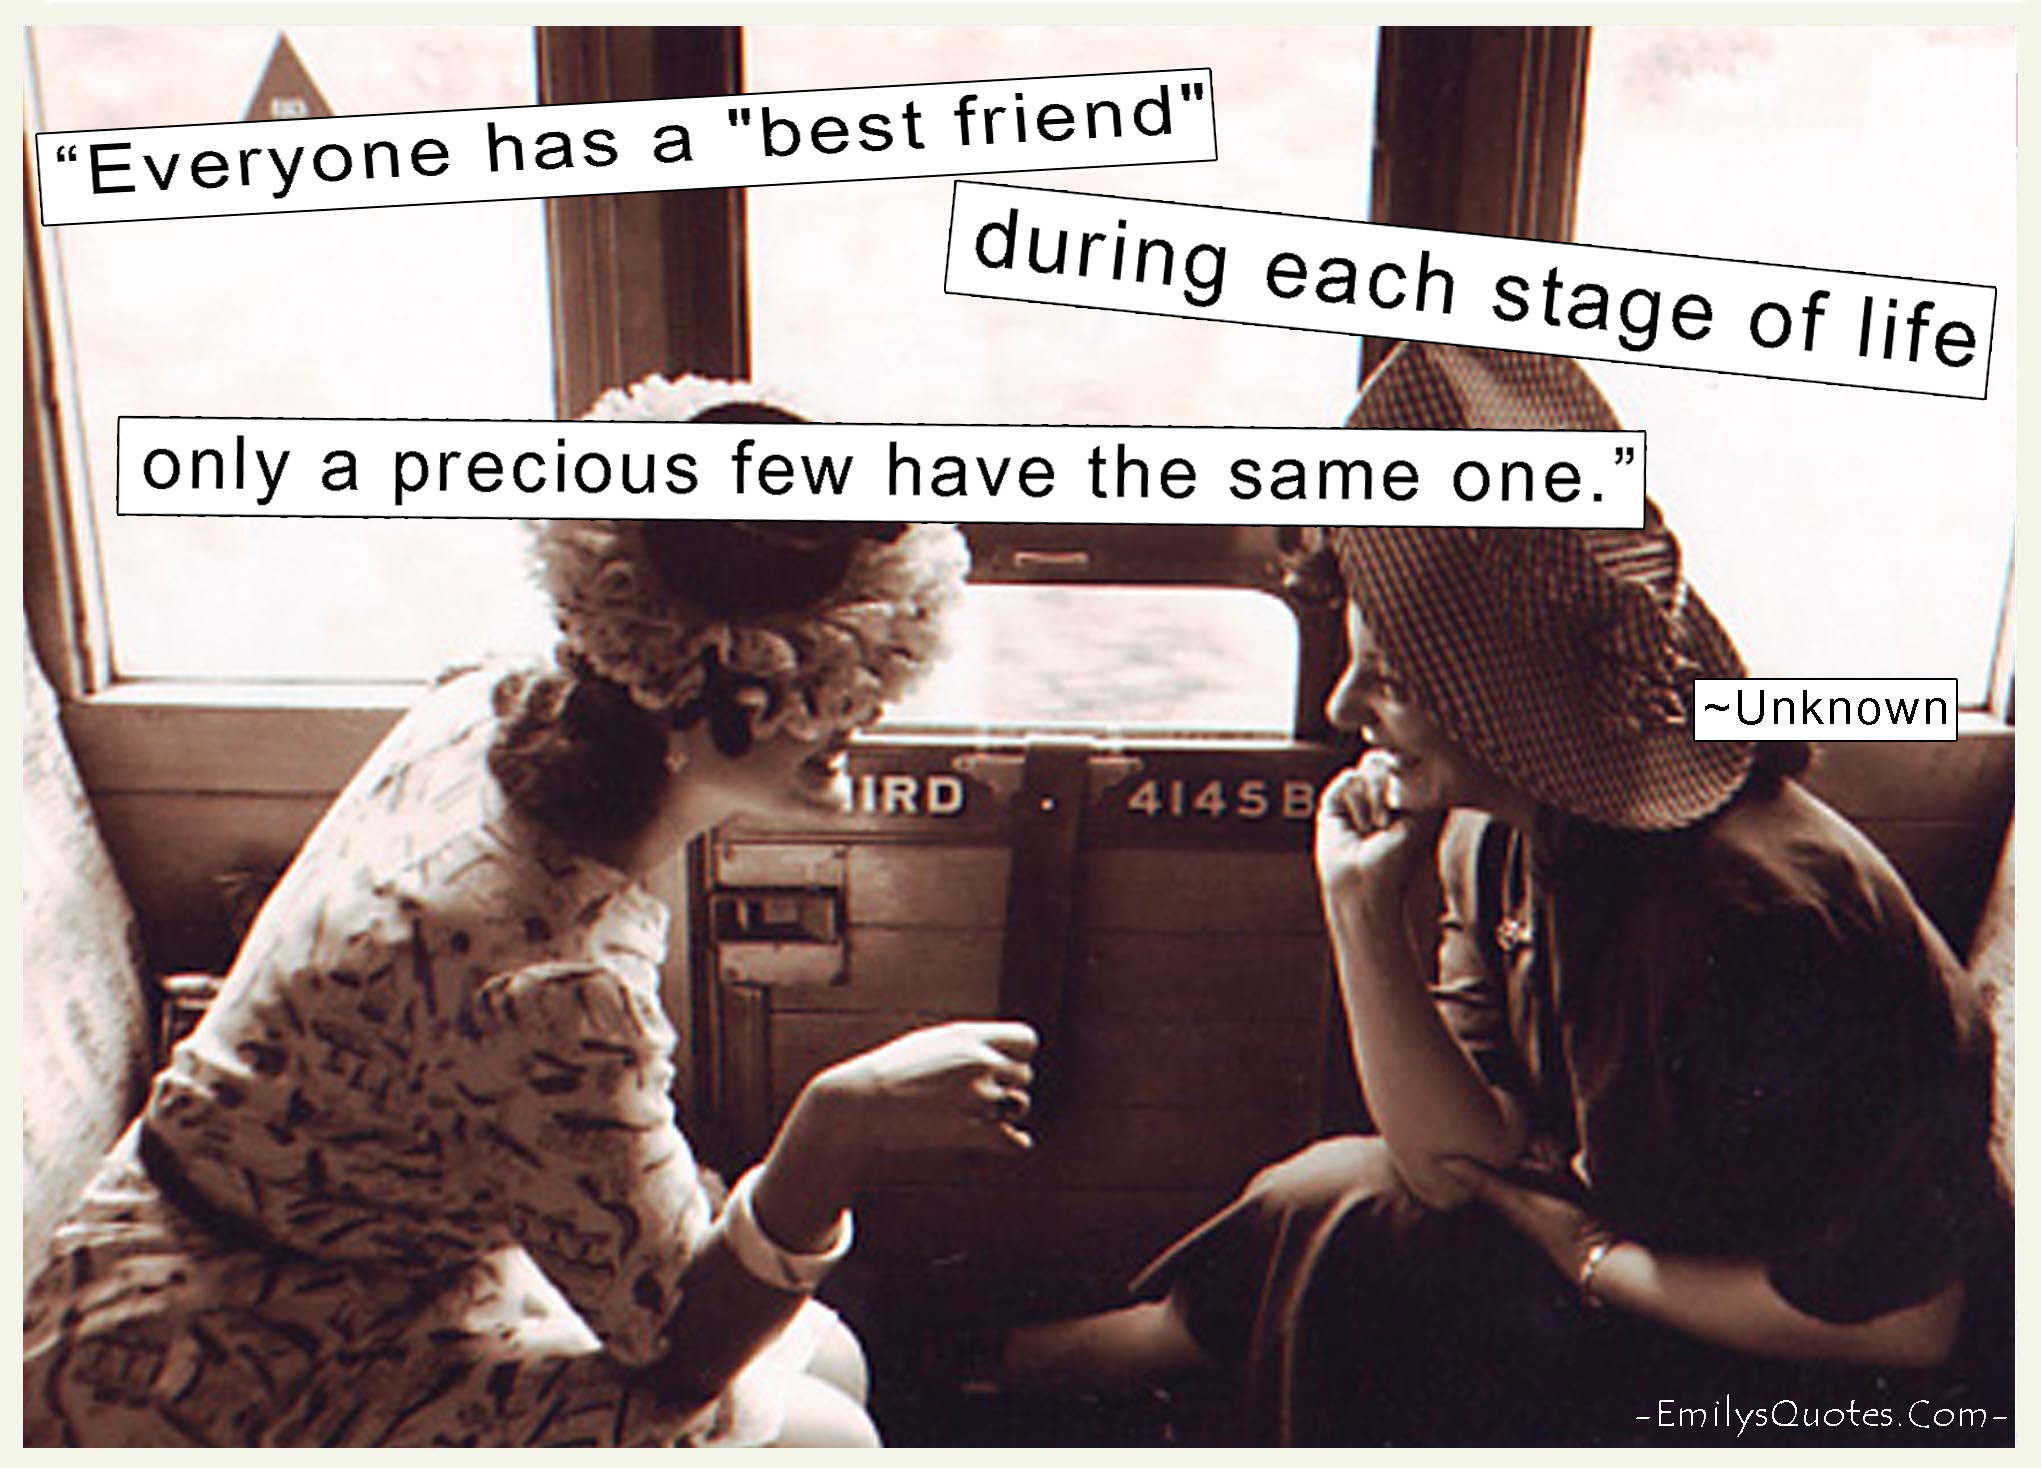 Everyone has a “best friend” during each stage of life-only a precious few have the same one